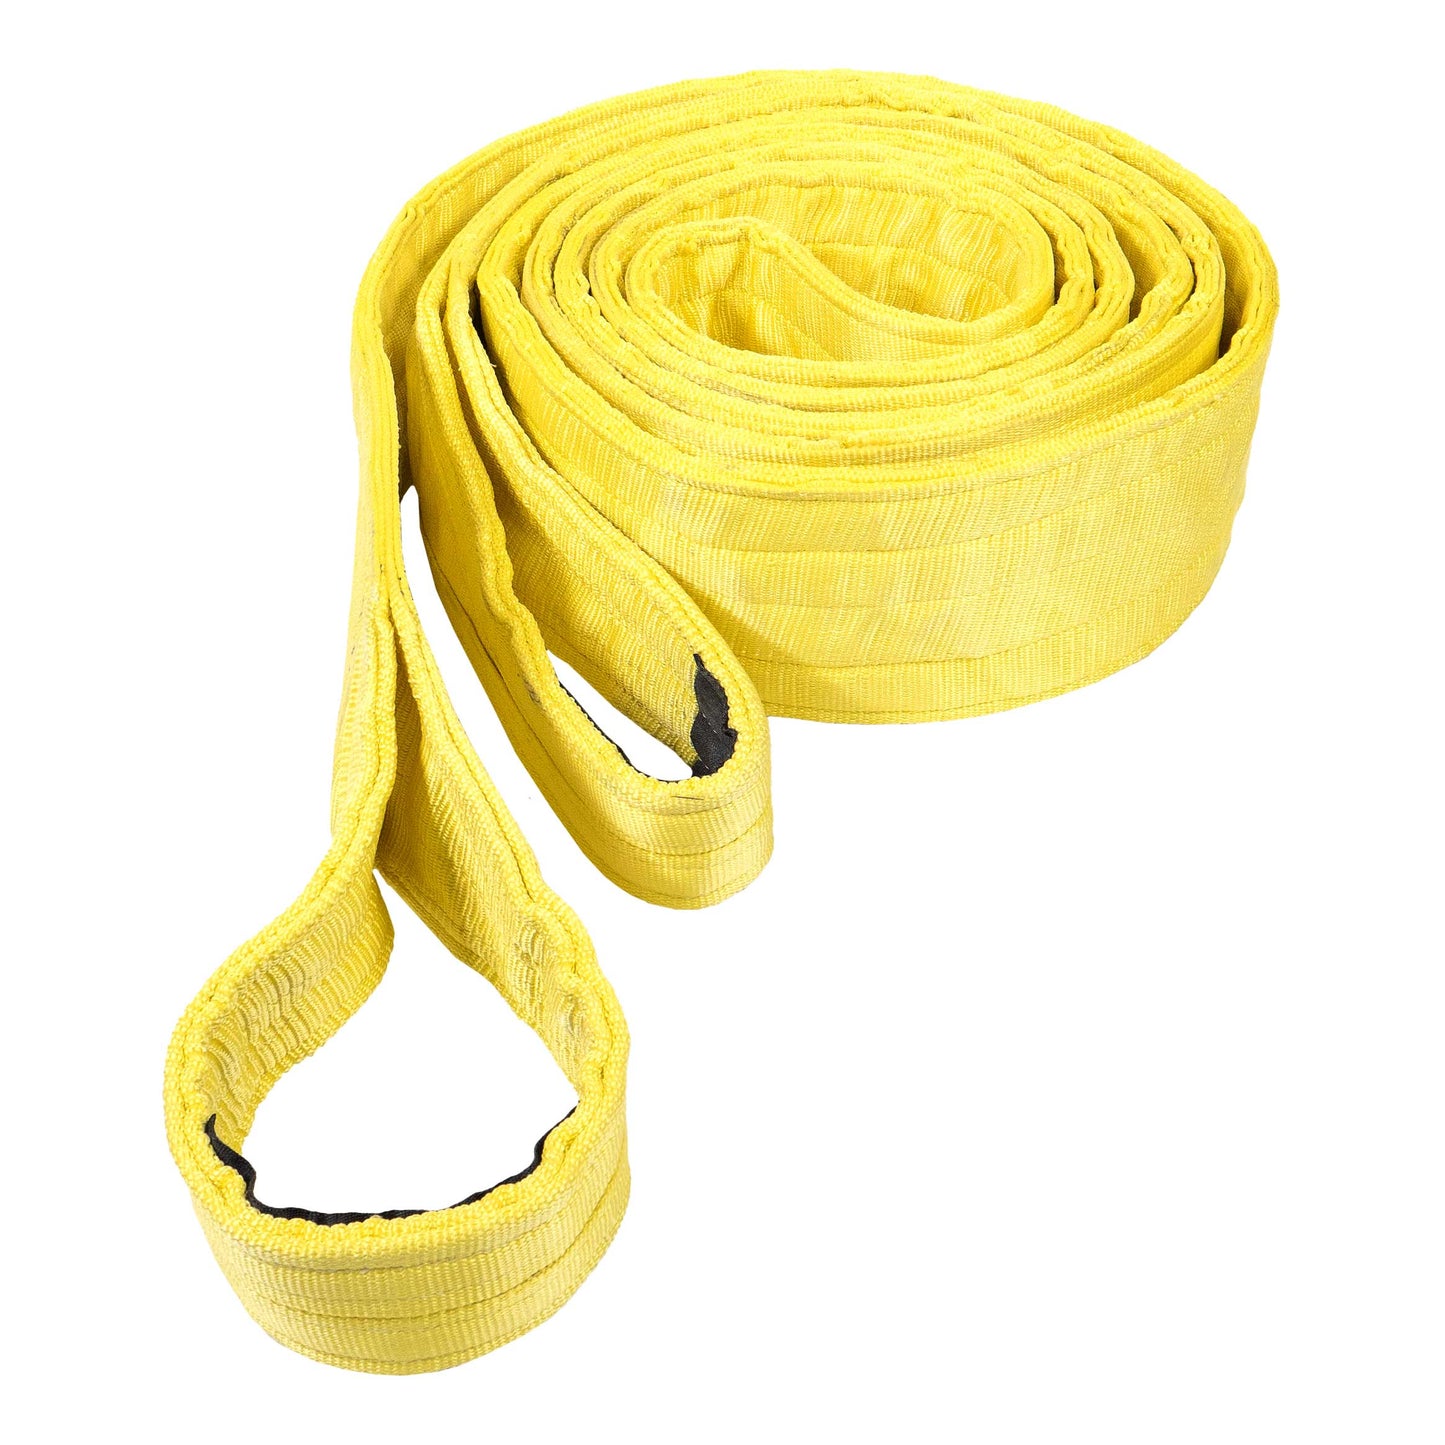 8" x 30' Heavy Duty Recovery Strap with Reinforced Cordura Eyes - 4 Ply | 102,500 WLL